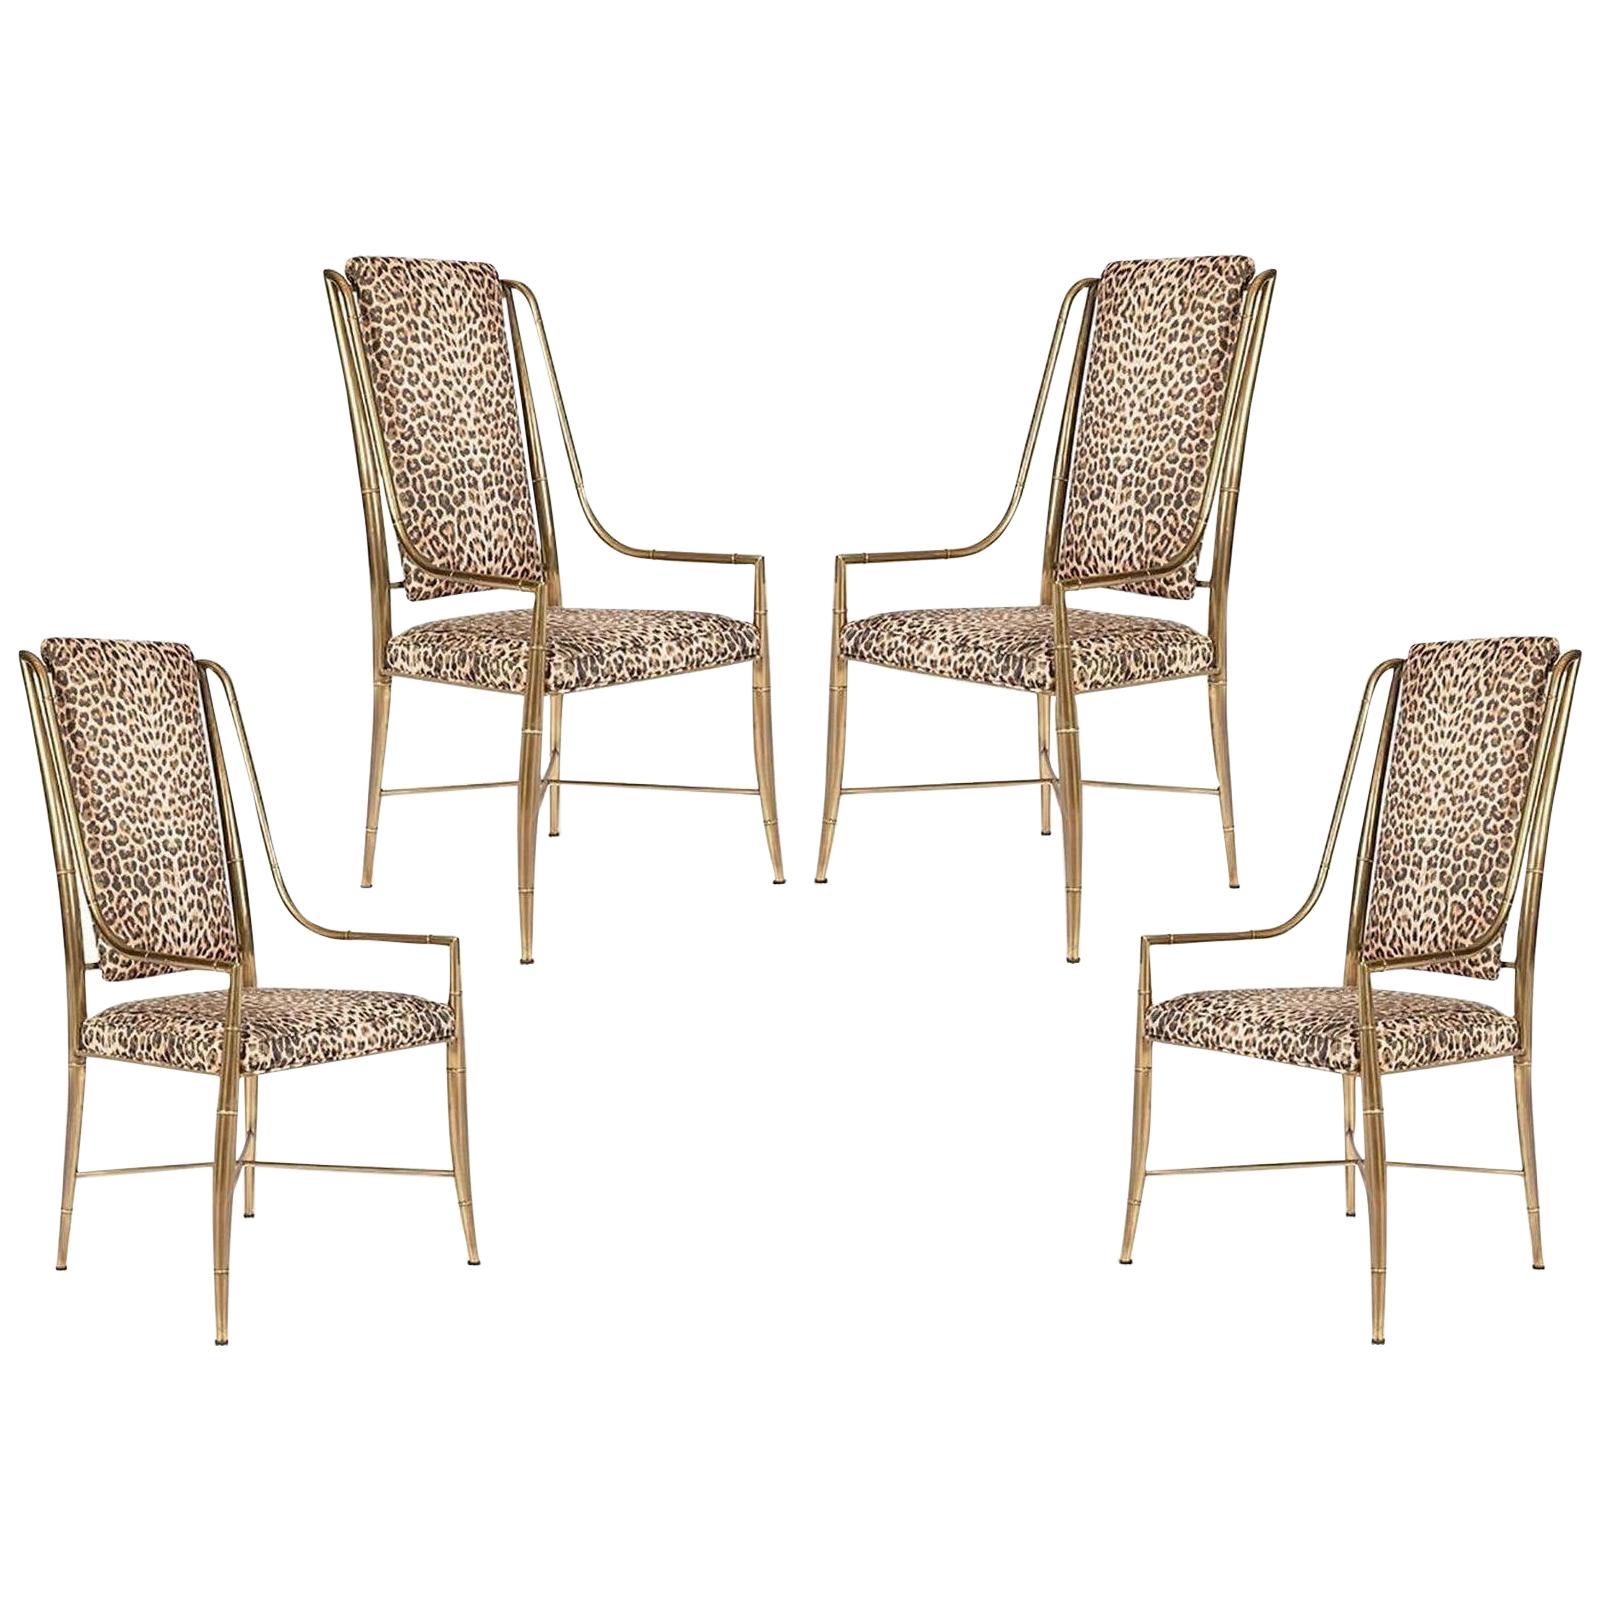 Four Brass "Imperial" Dining Chairs by Weiman/Warren Lloyd for Mastercraft